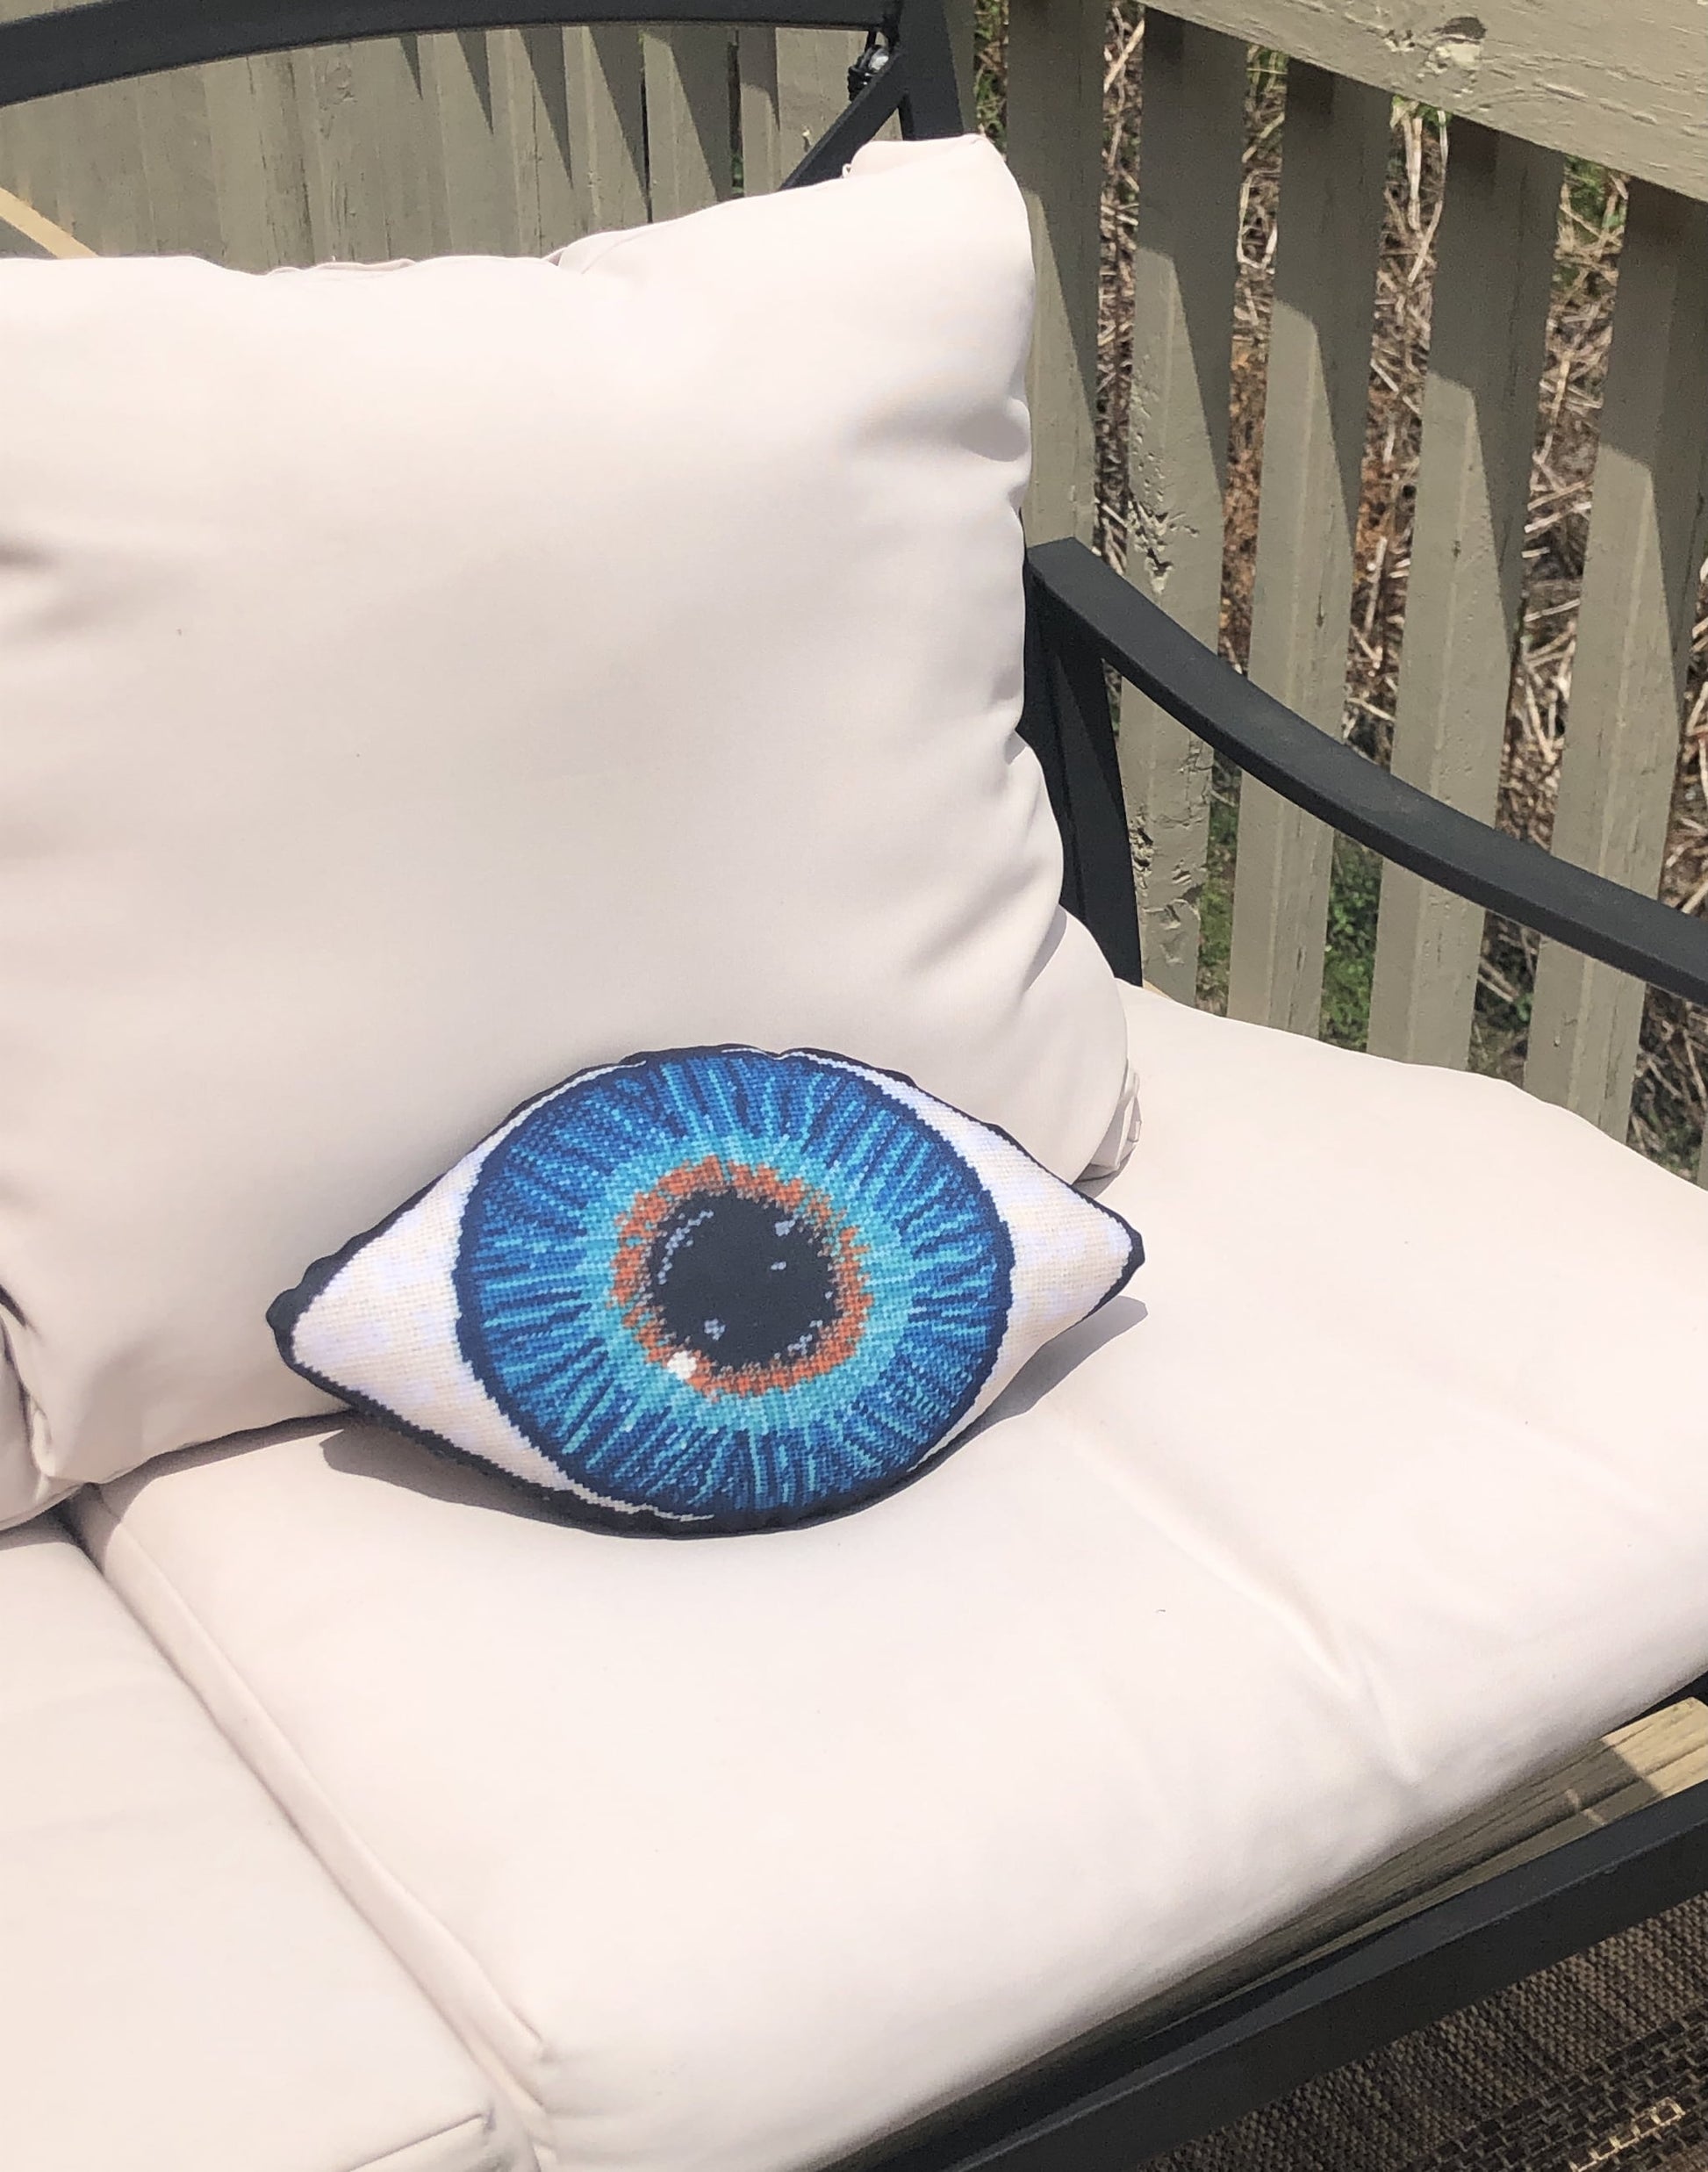 blue eye sculpted water-resistant outdoor pillow double sided